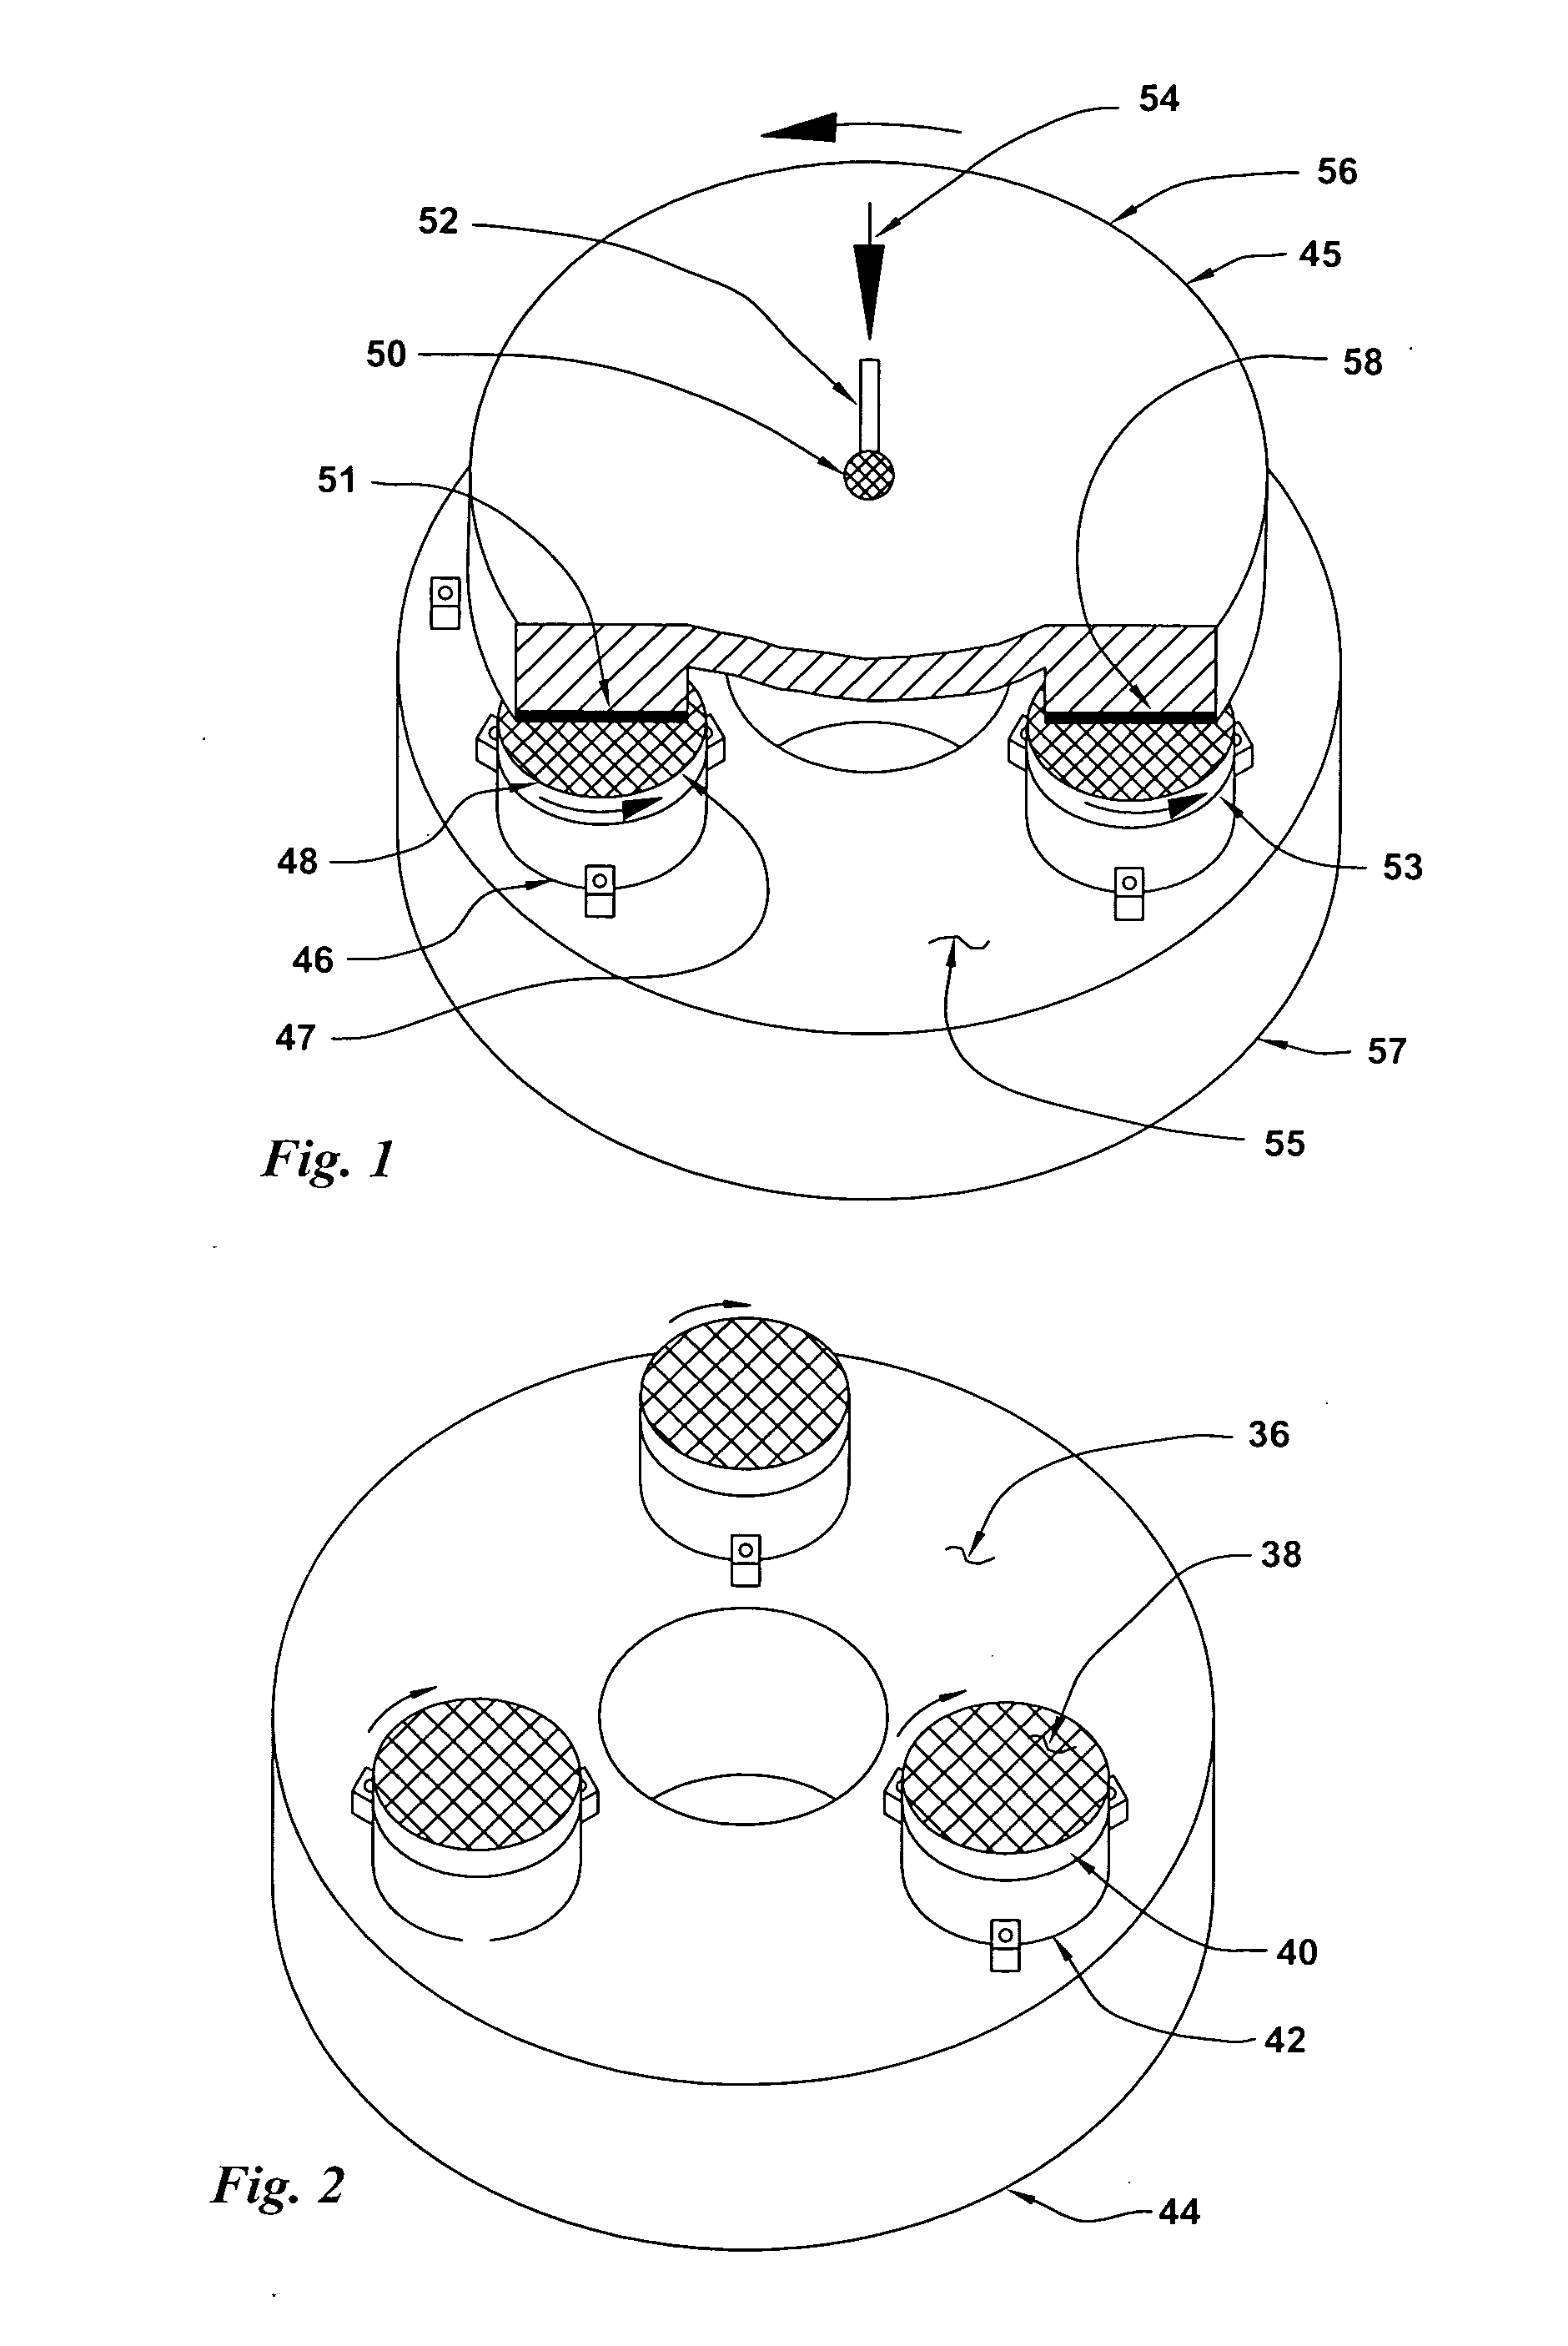 Three-point spindle-supported floating abrasive platen